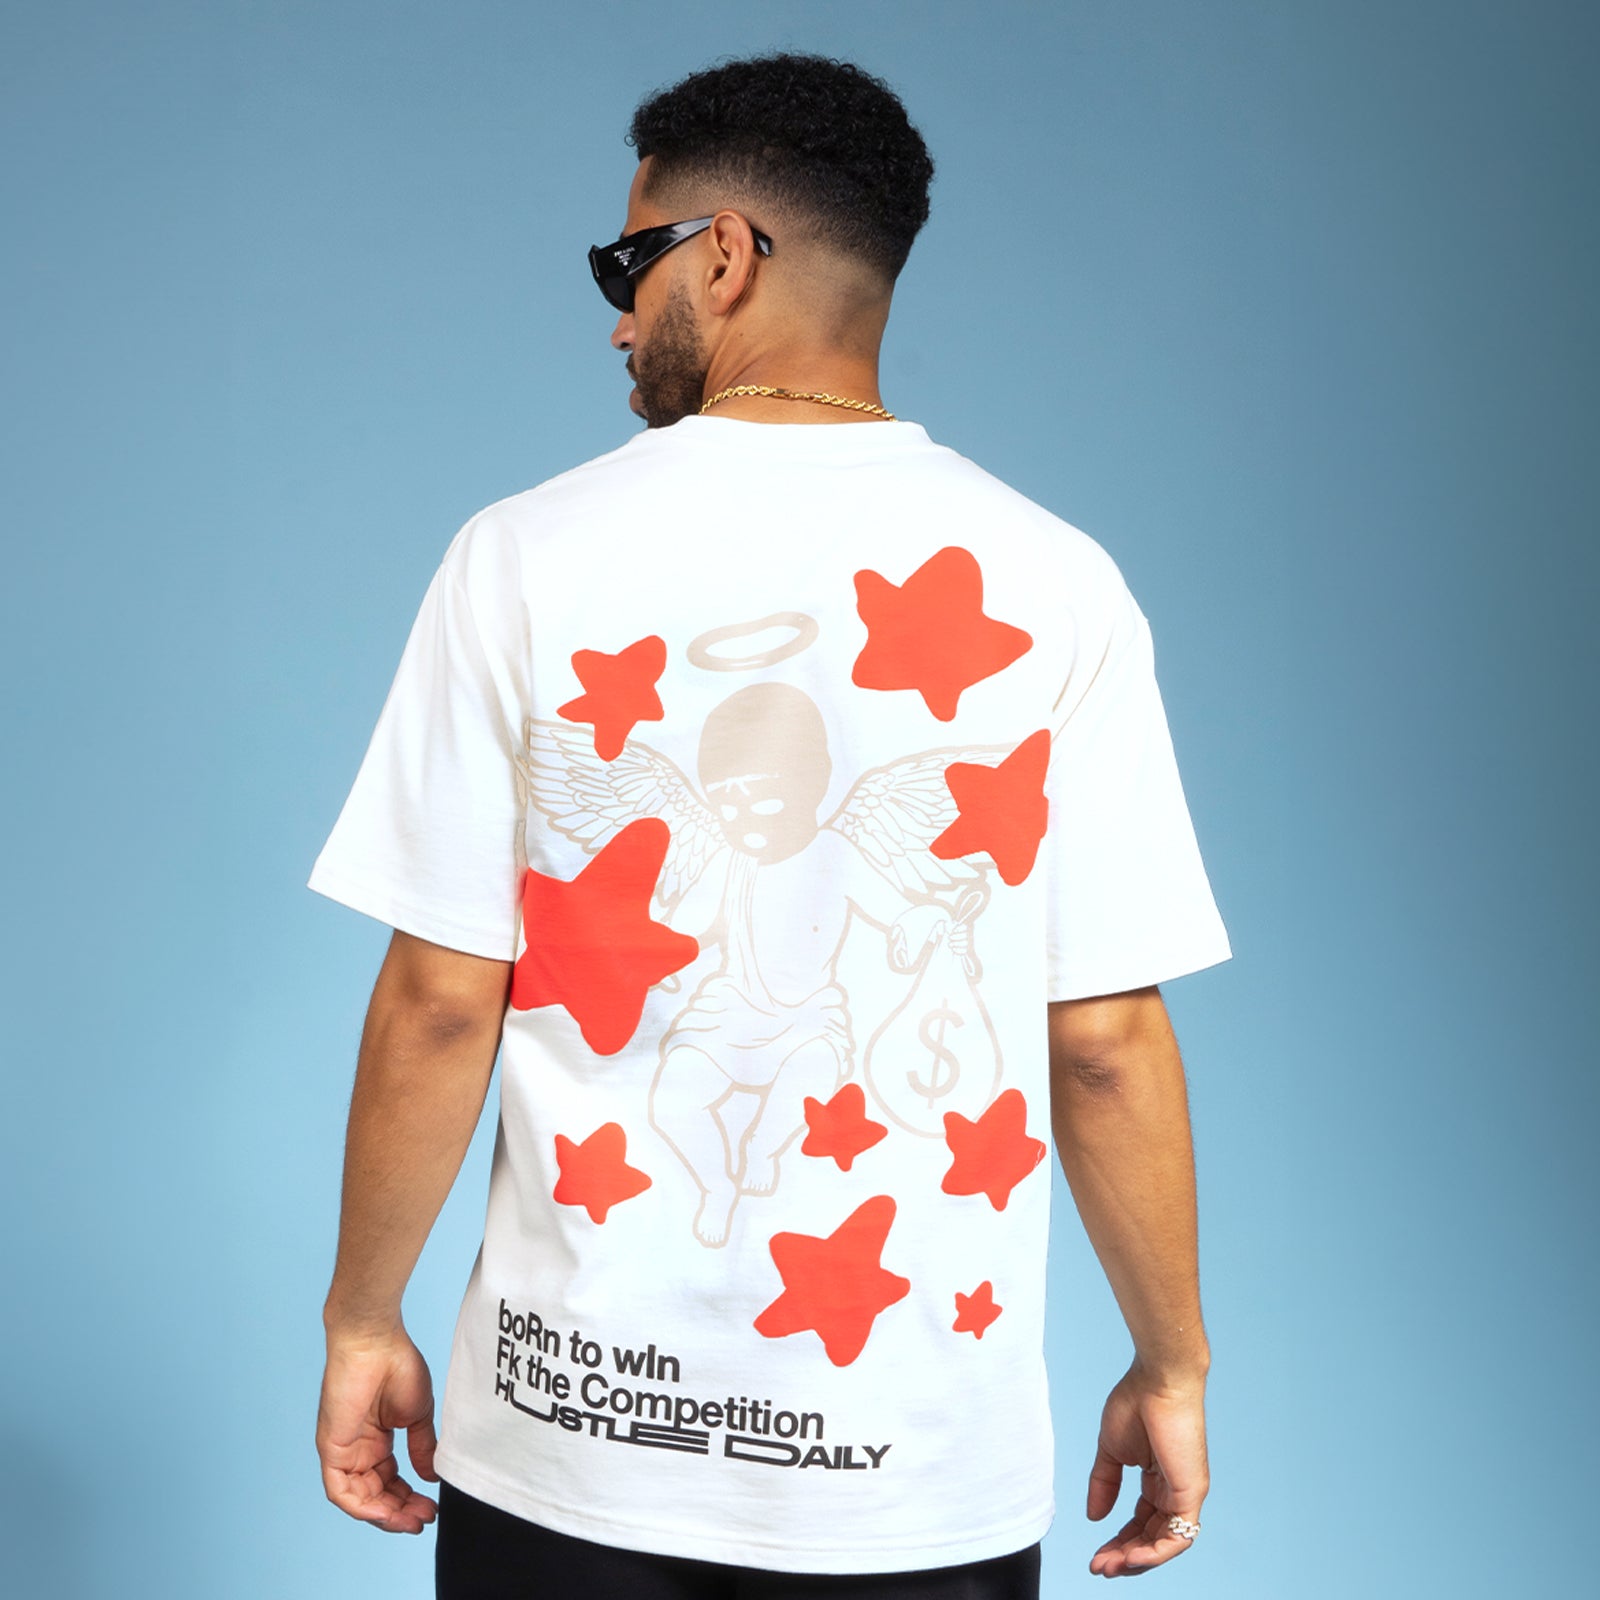 MM Red All Star Sky Tee - RED LABEL